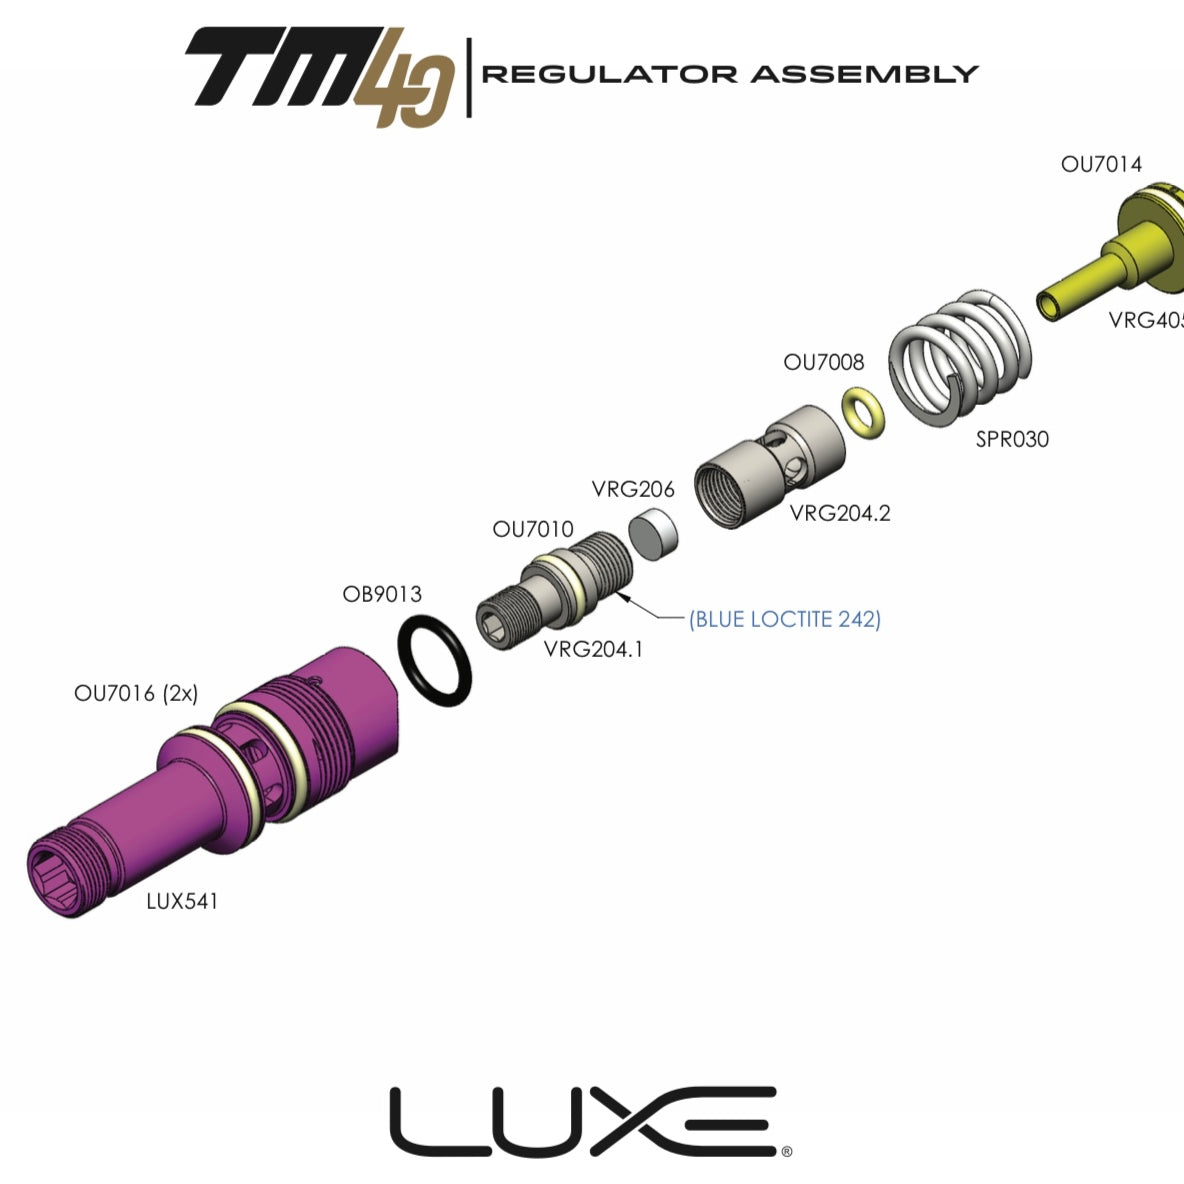 DLX Luxe TM40 Regulator System Parts Picker - Pick the Part You Need!